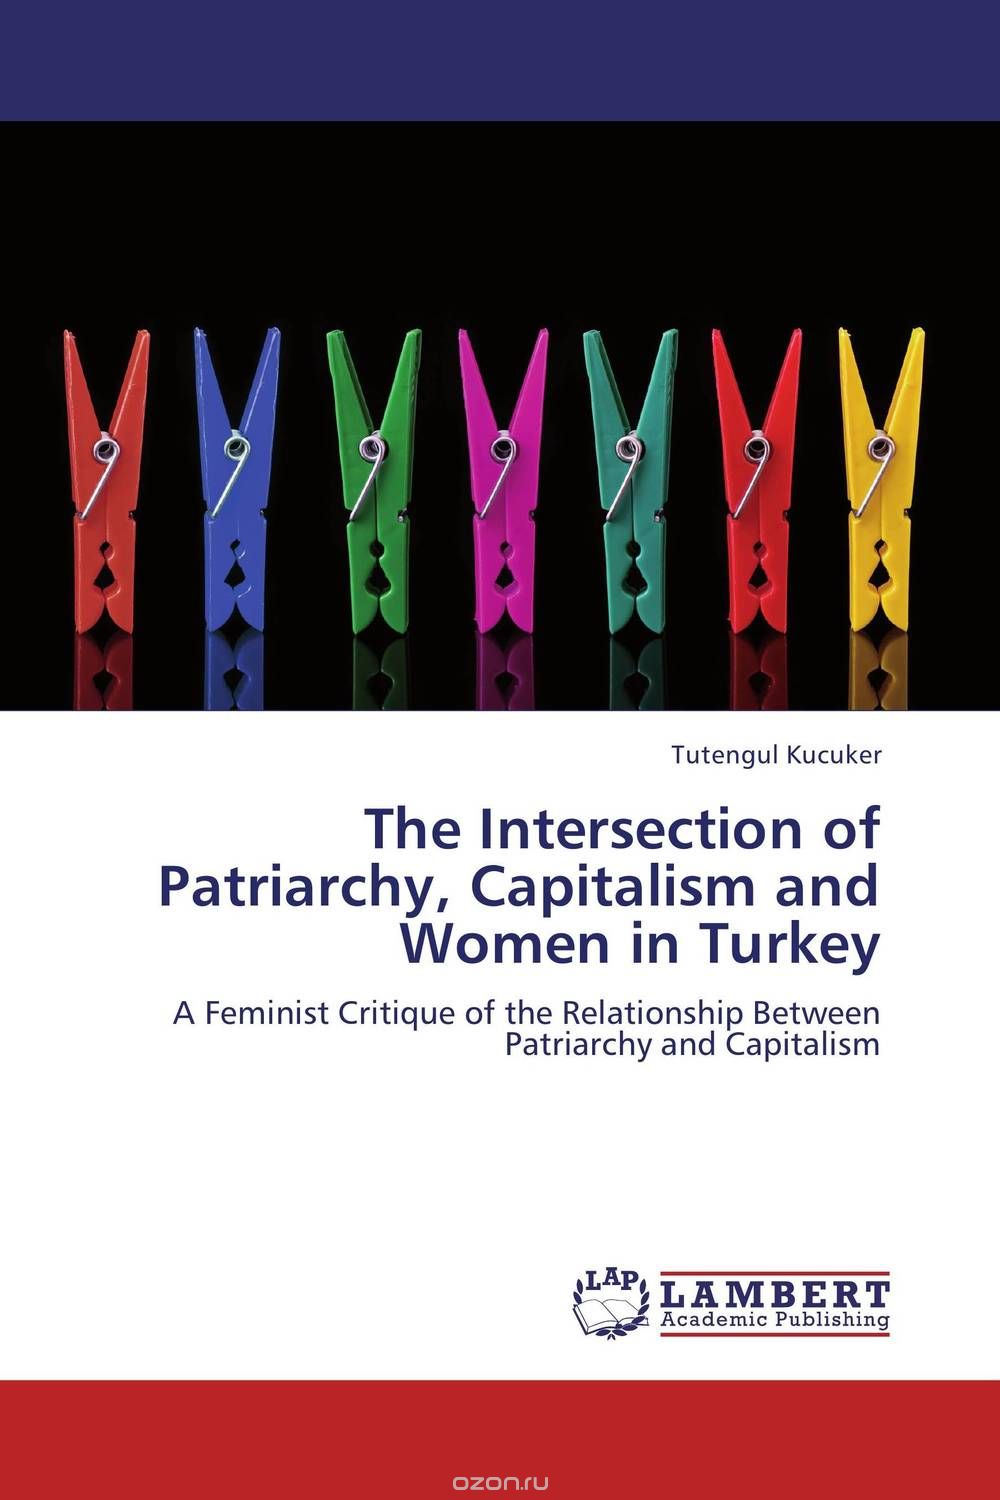 Скачать книгу "The Intersection of Patriarchy, Capitalism and Women in Turkey"